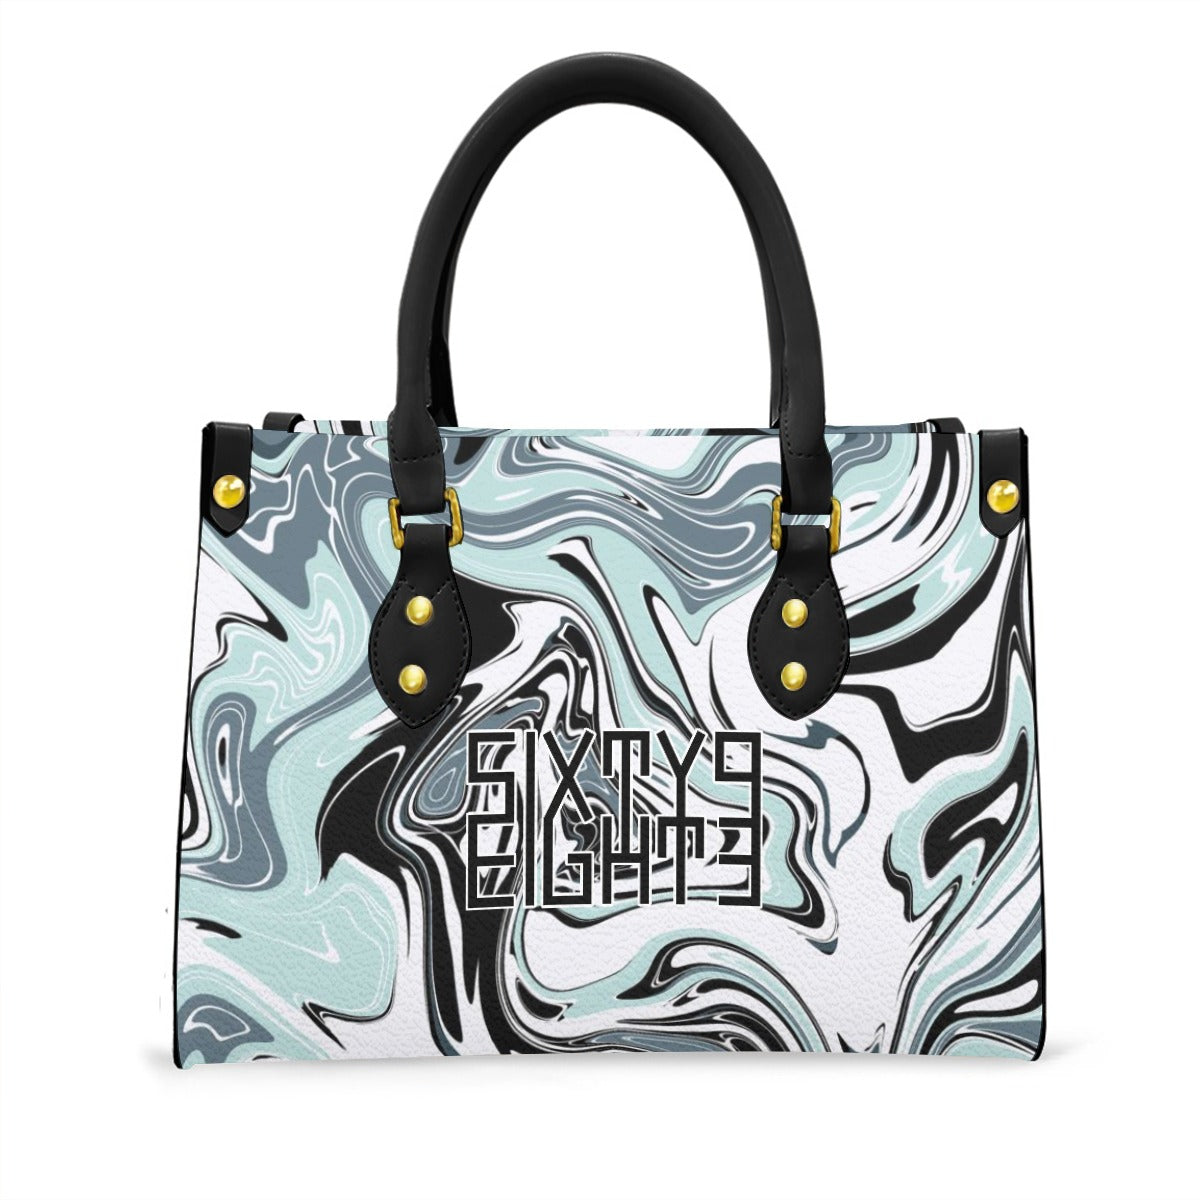 Sixty Eight 93 Logo Black & White Women's Tote Bag With Black Handle #2